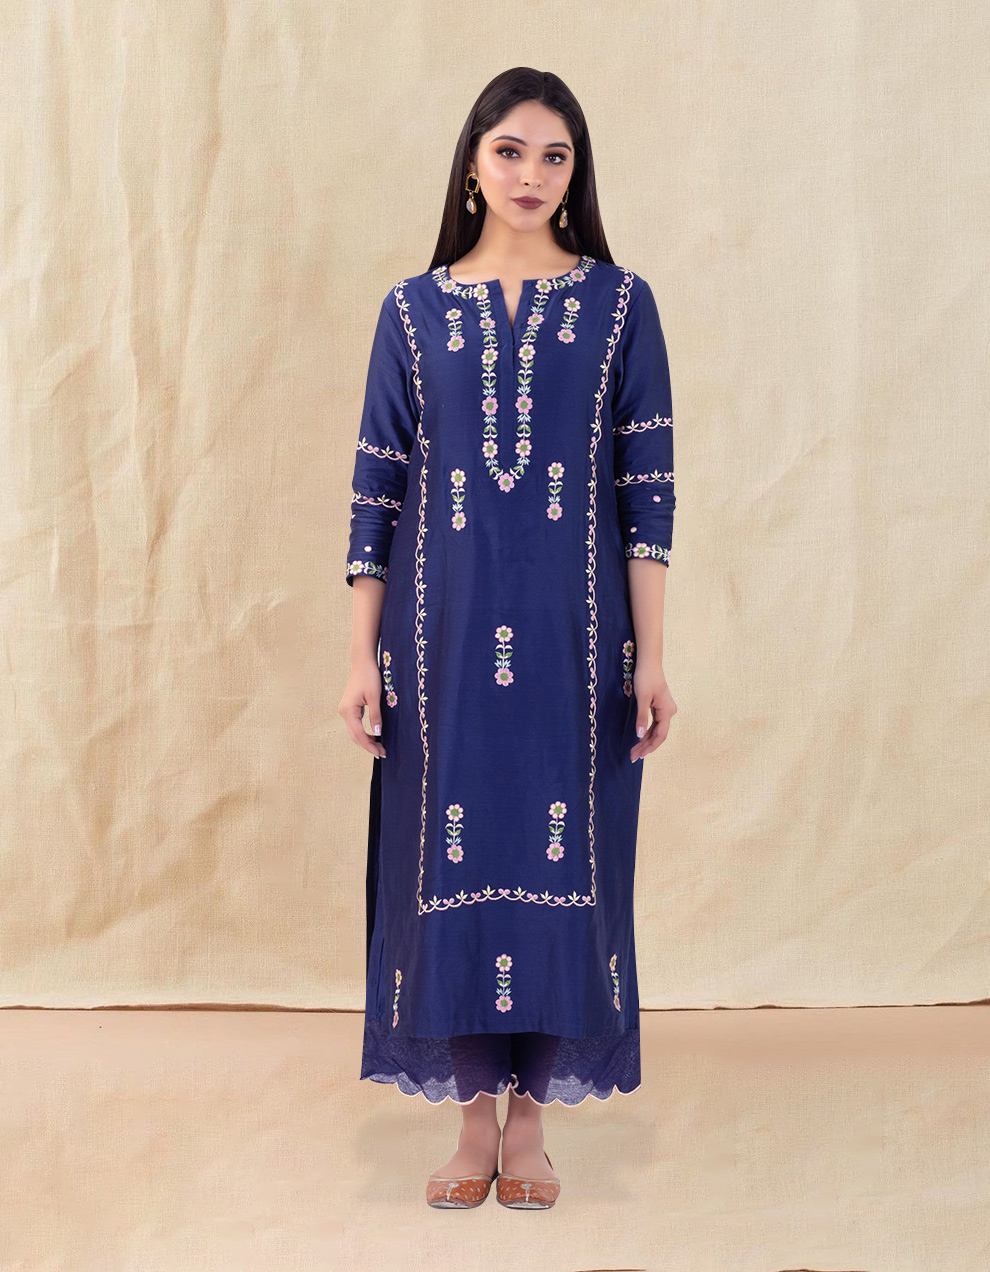 Shop-from-Indian-Fashion-Designer-designs-and-Buy-latest-Blue-blue-embroidered-chanderi-silk-kurta-designs-in-India-2